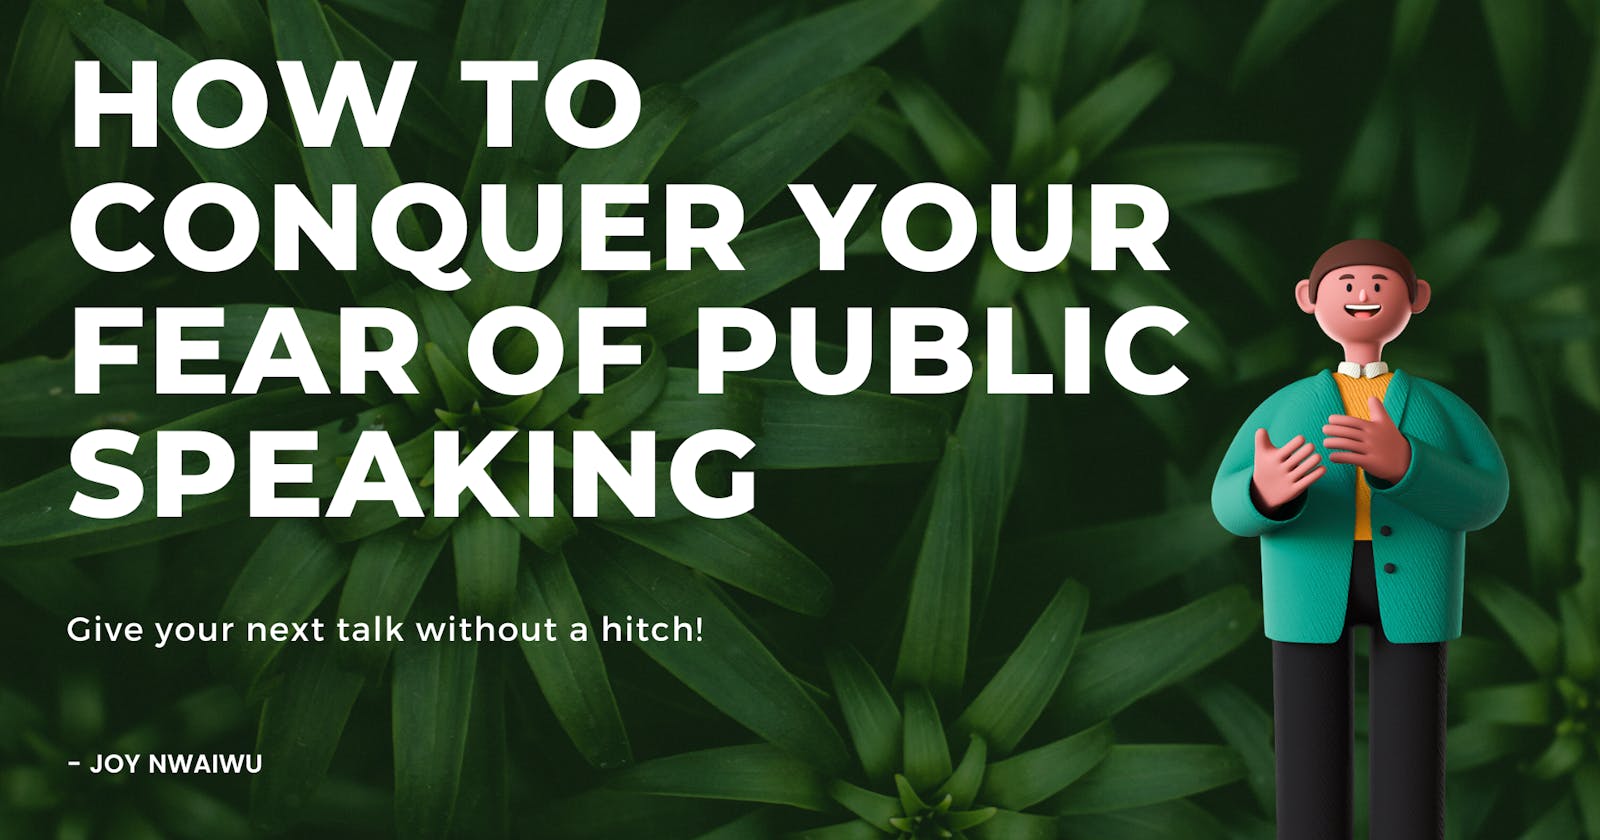 How to conquer your fear of public speaking